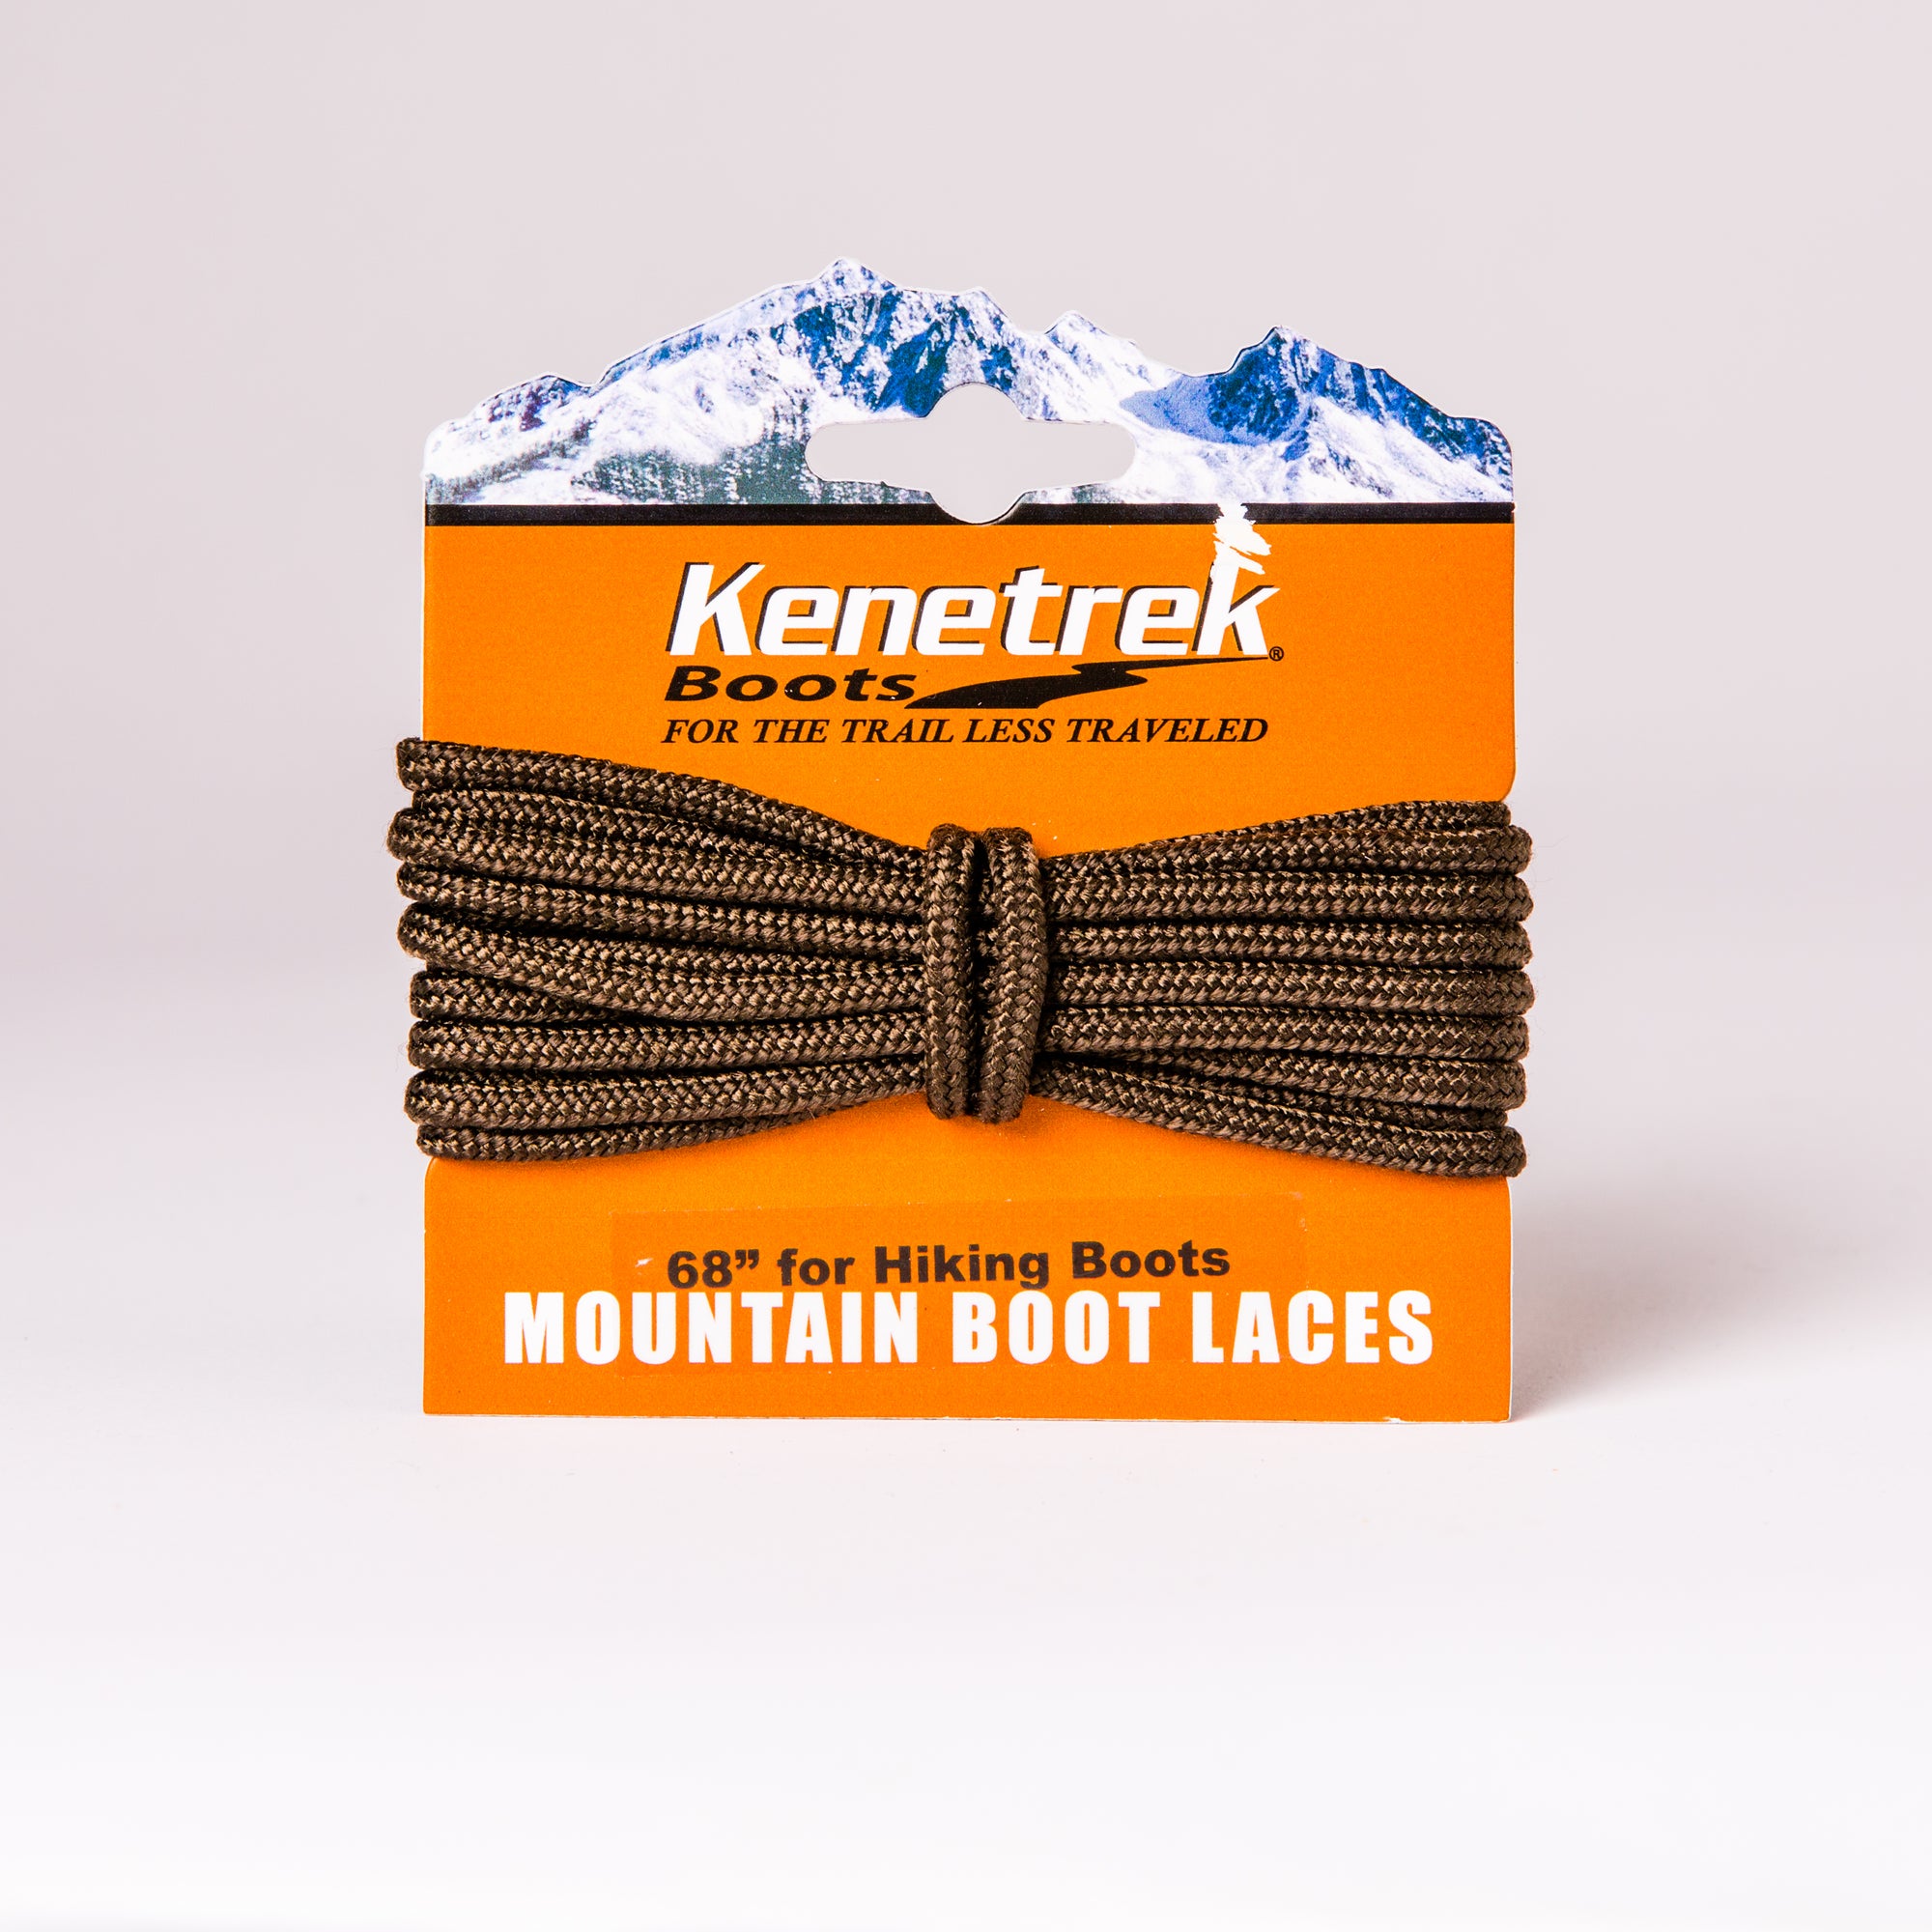 Kenetrek Mountain Boot Laces 68” for Mountain Boots